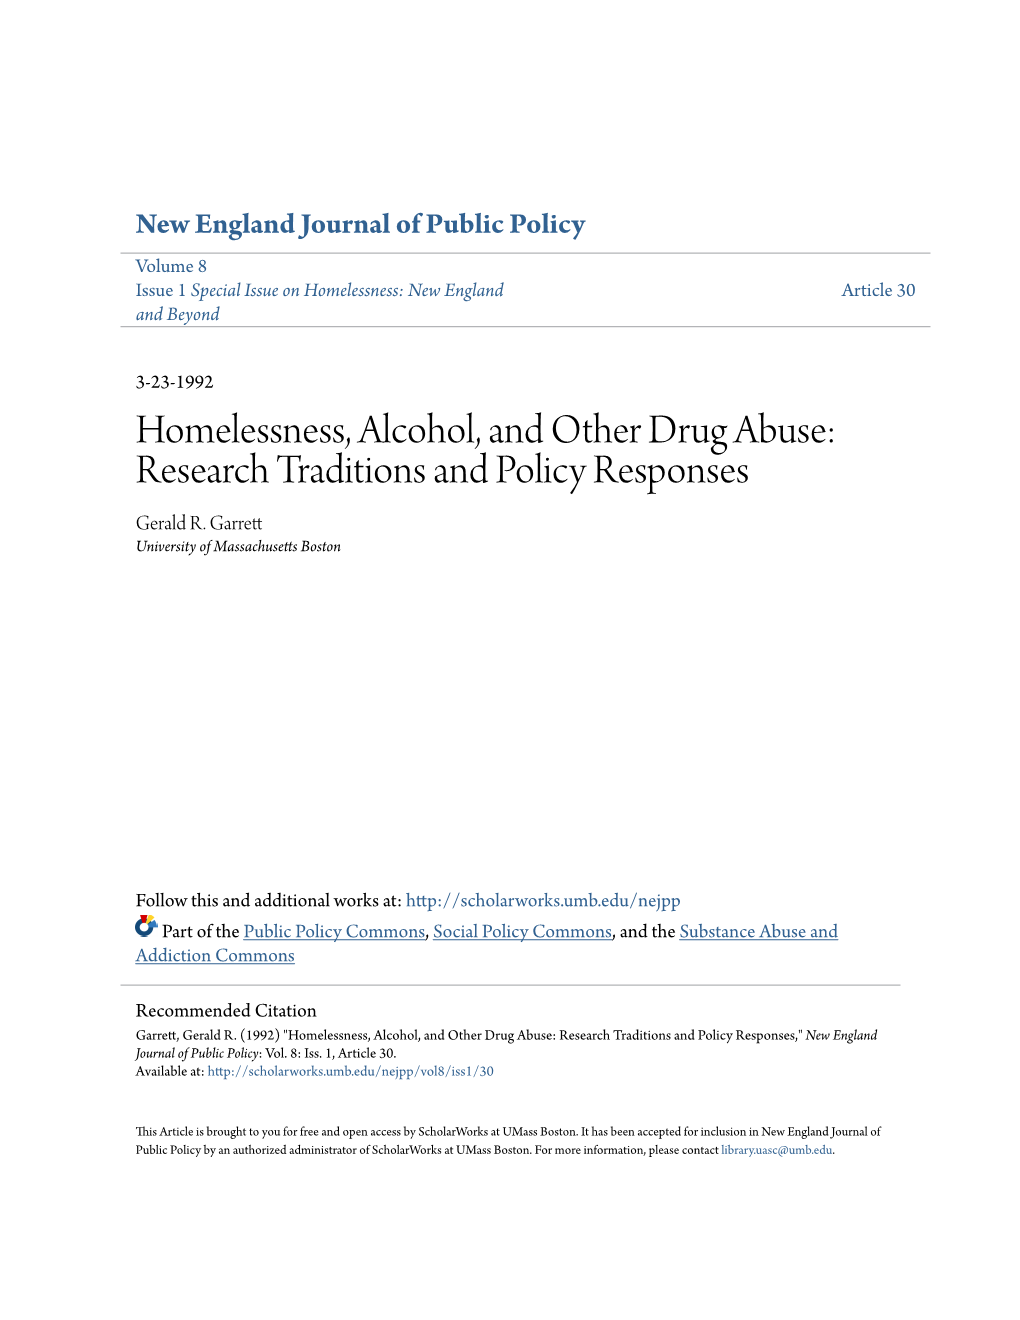 Homelessness, Alcohol, and Other Drug Abuse: Research Traditions and Policy Responses Gerald R